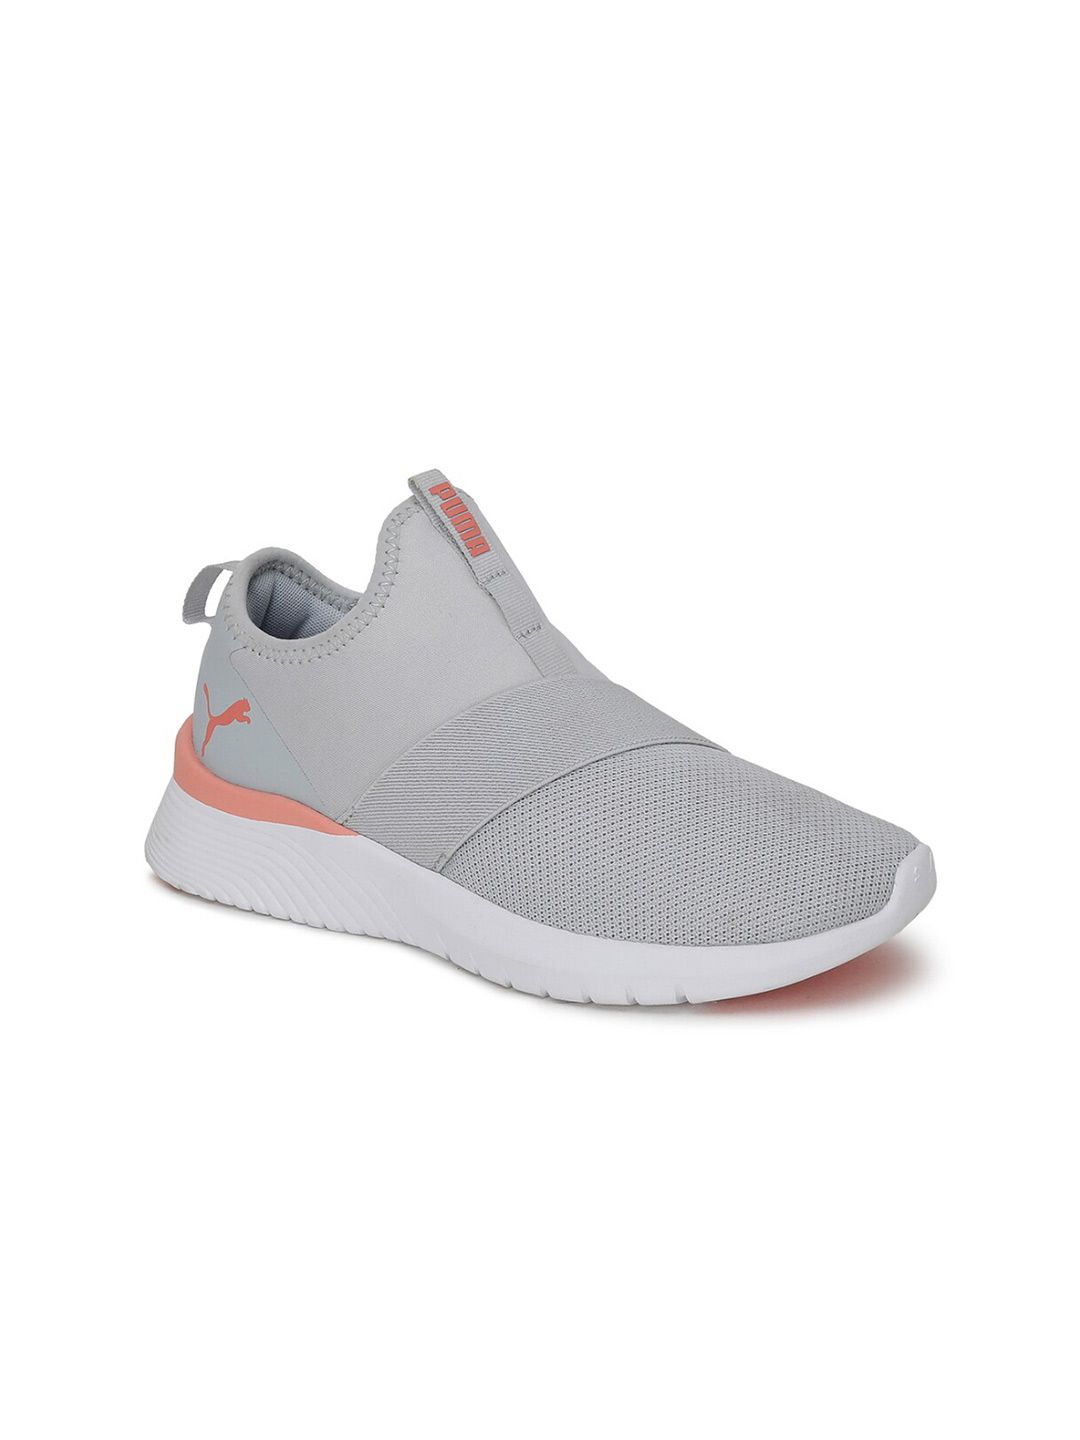 Puma Women Grey Textile Training or Gym Shoes Price in India